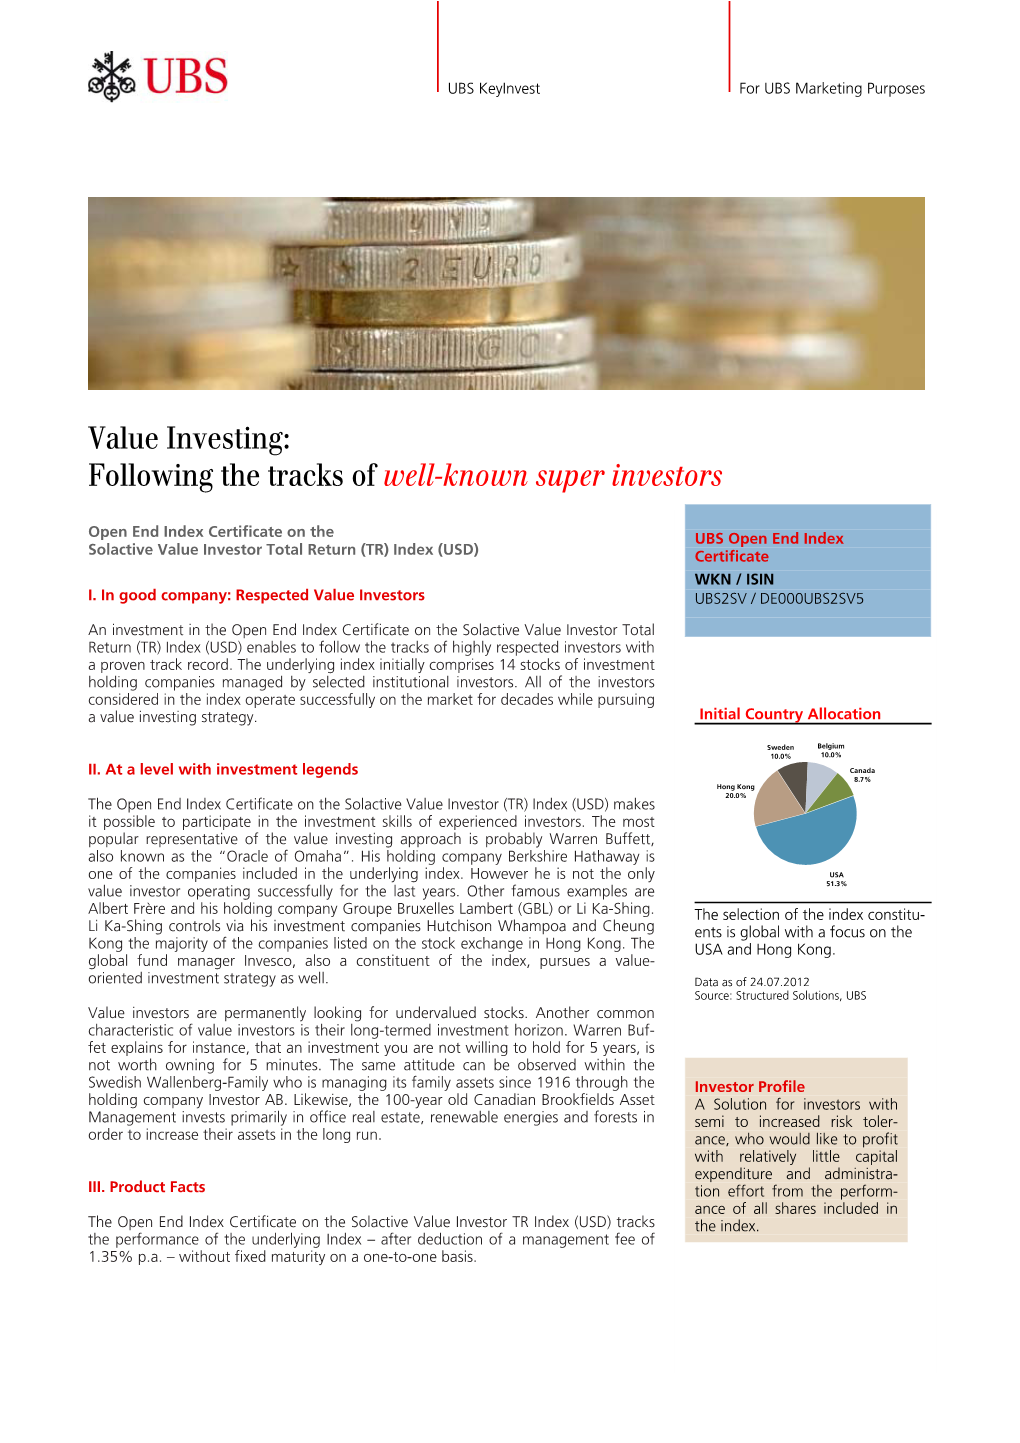 Value Investing: Following the Tracks of Well-Known Super Investors